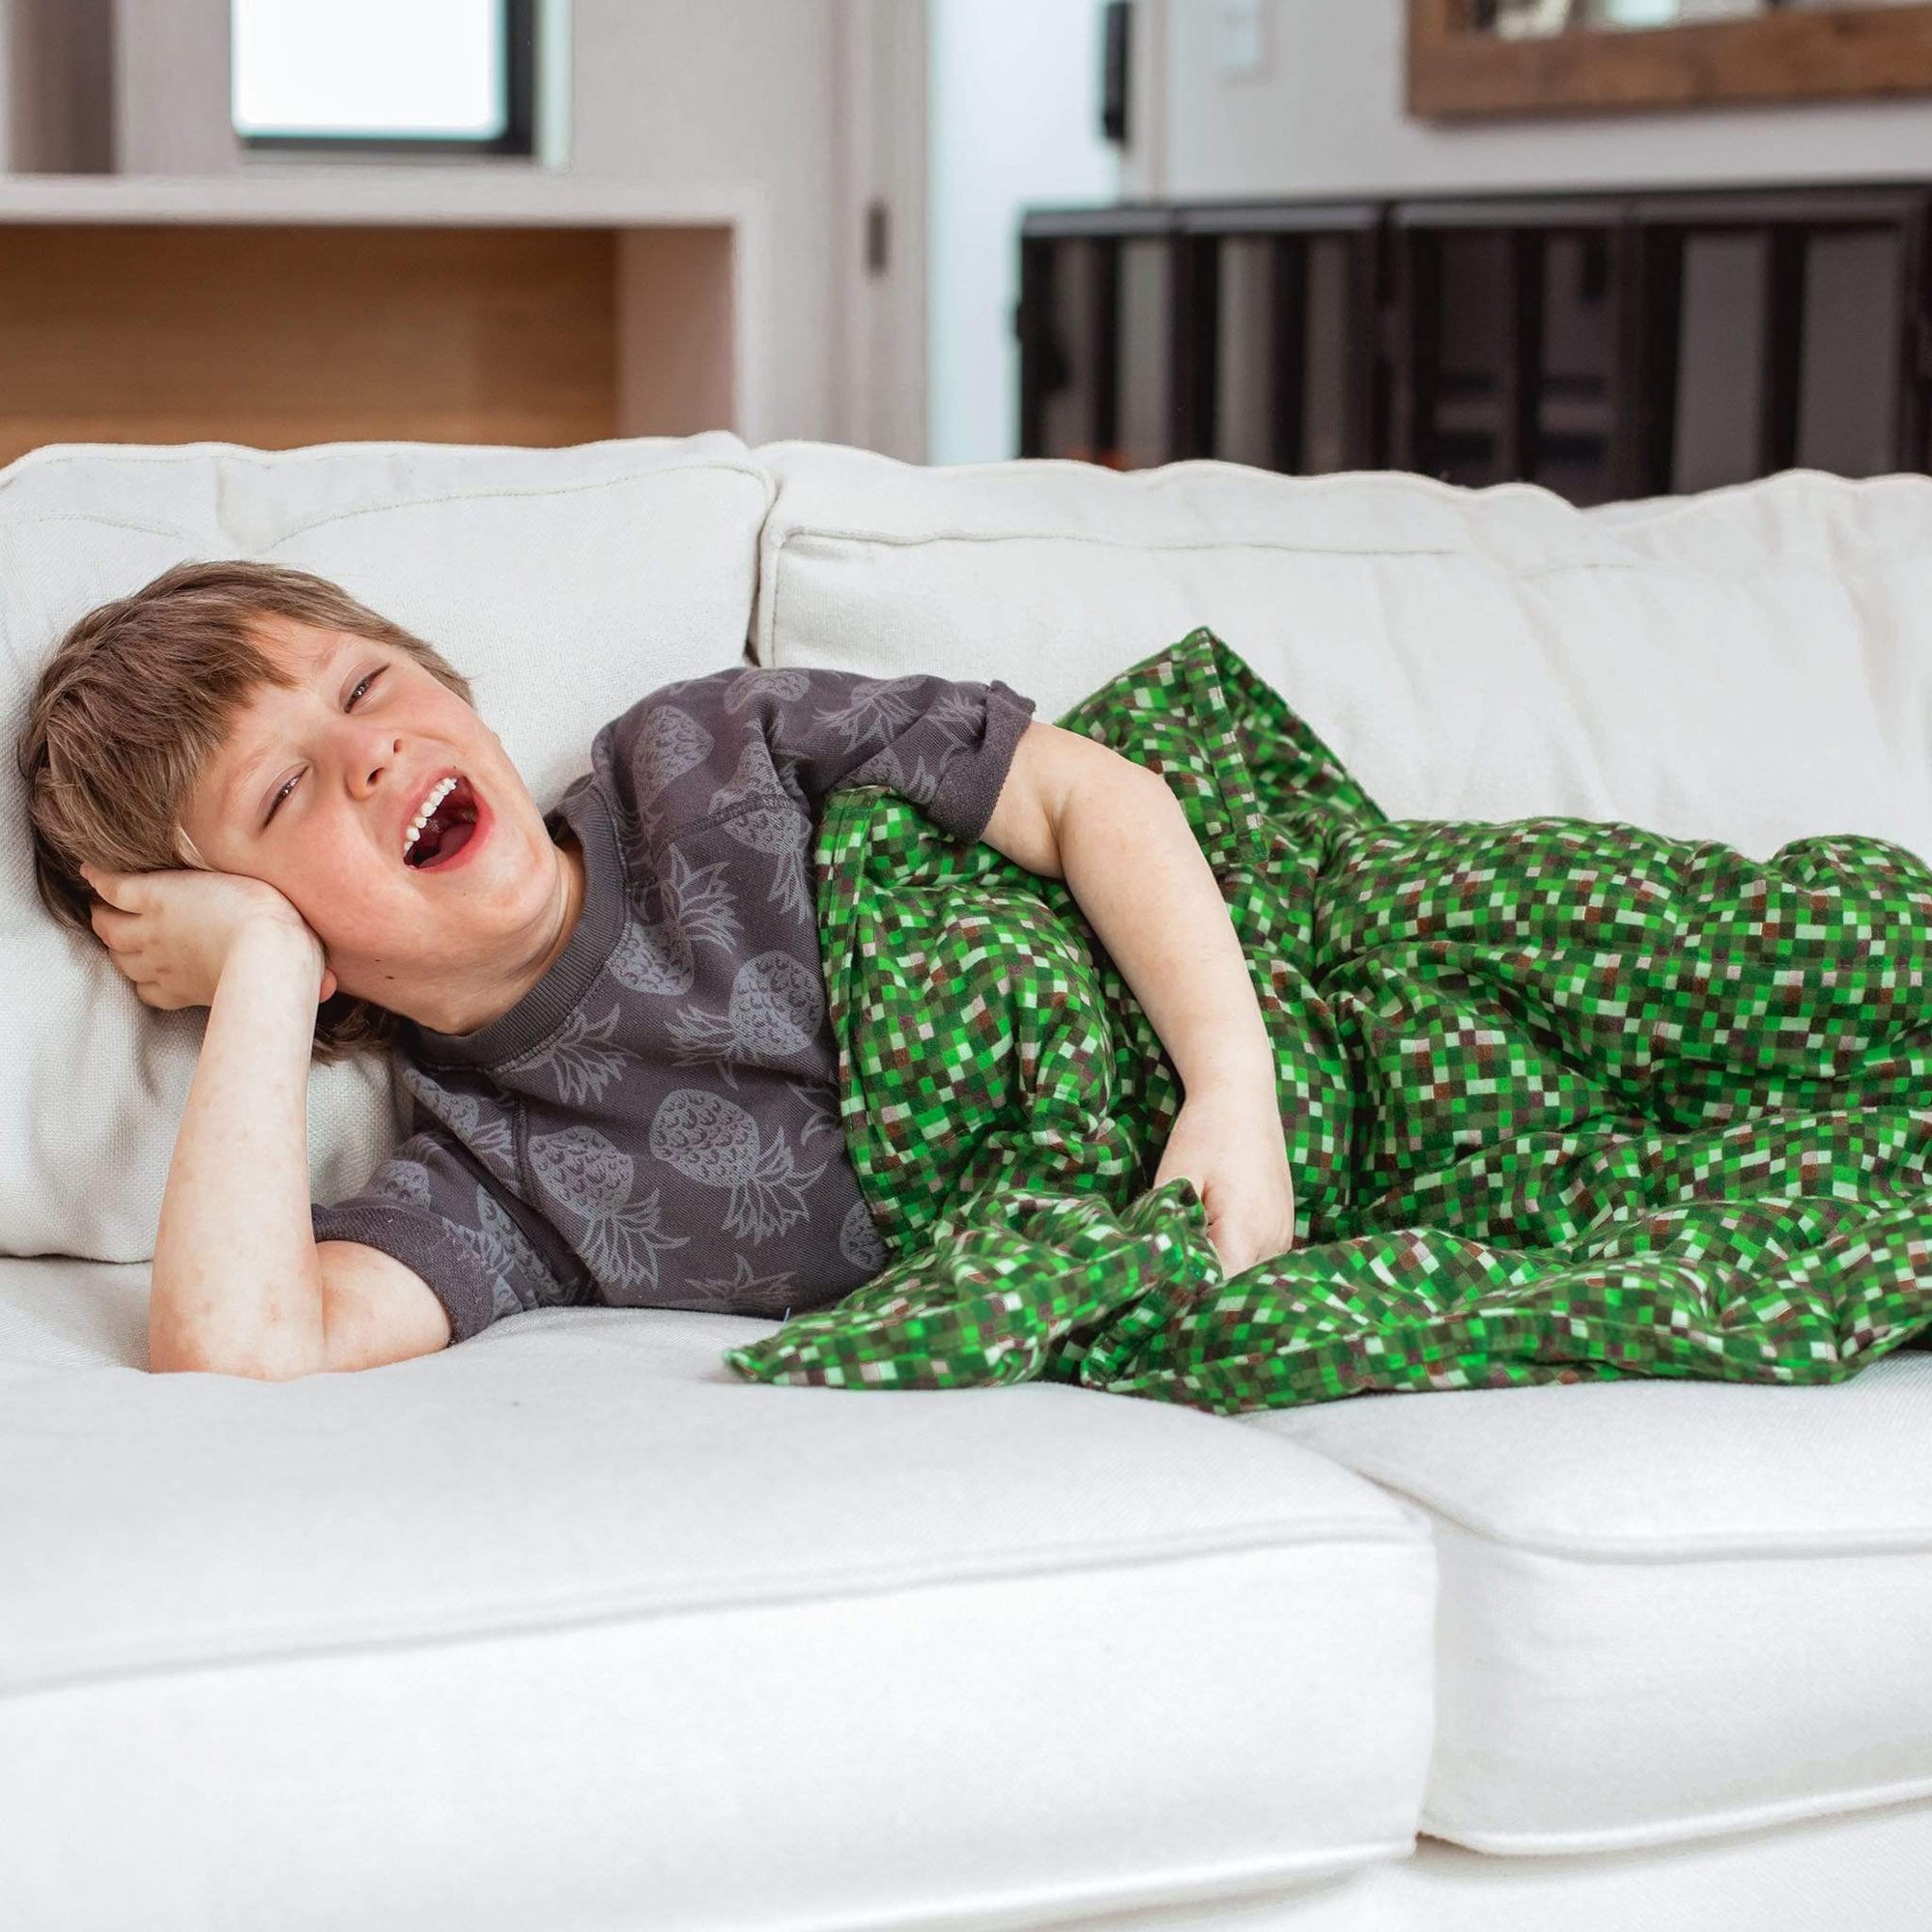 ADHD Momma discusses Mosaic Weighted Blankets